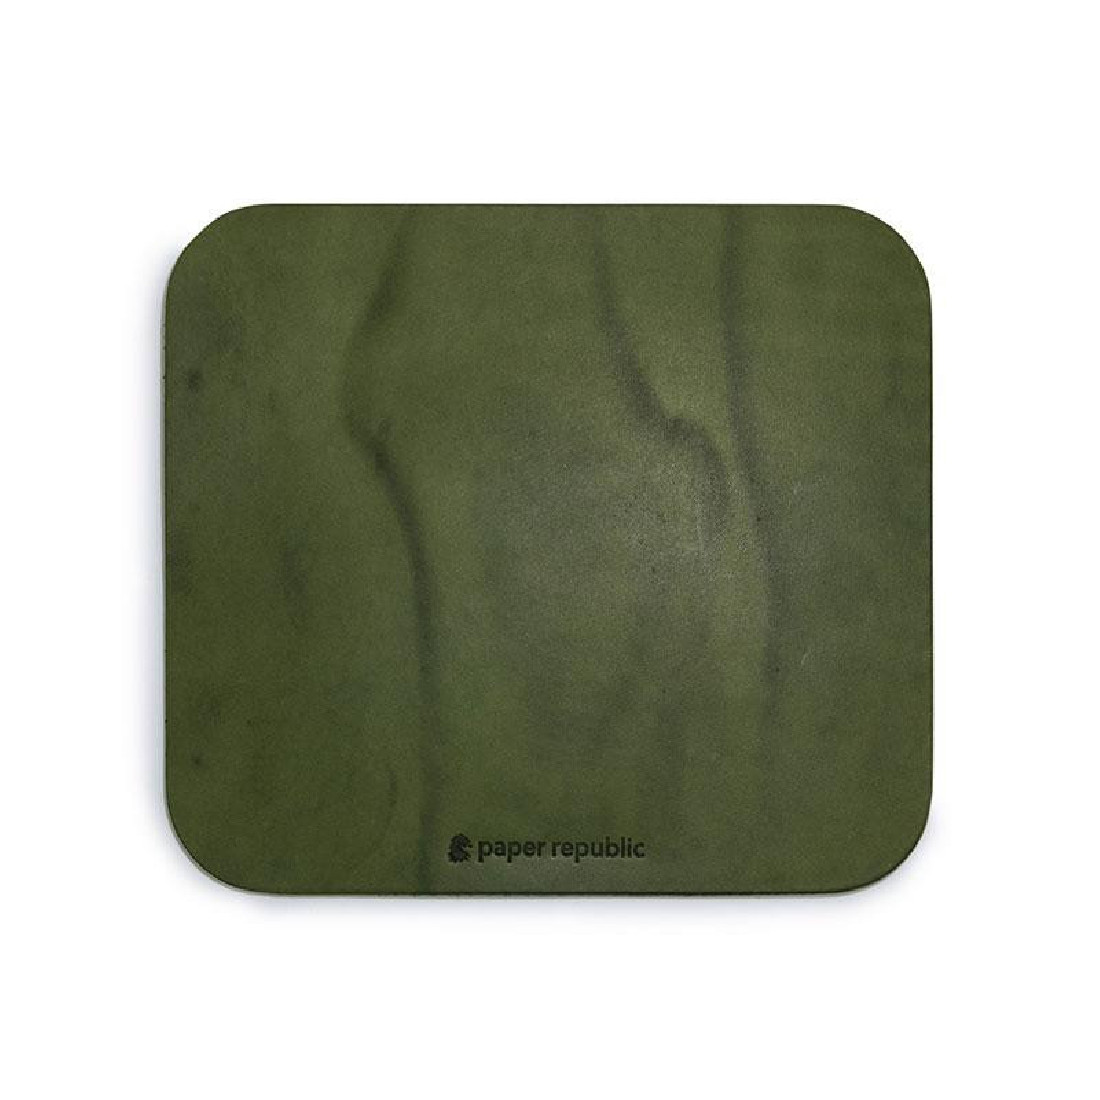 Paper Republic olive green leather mouse pad